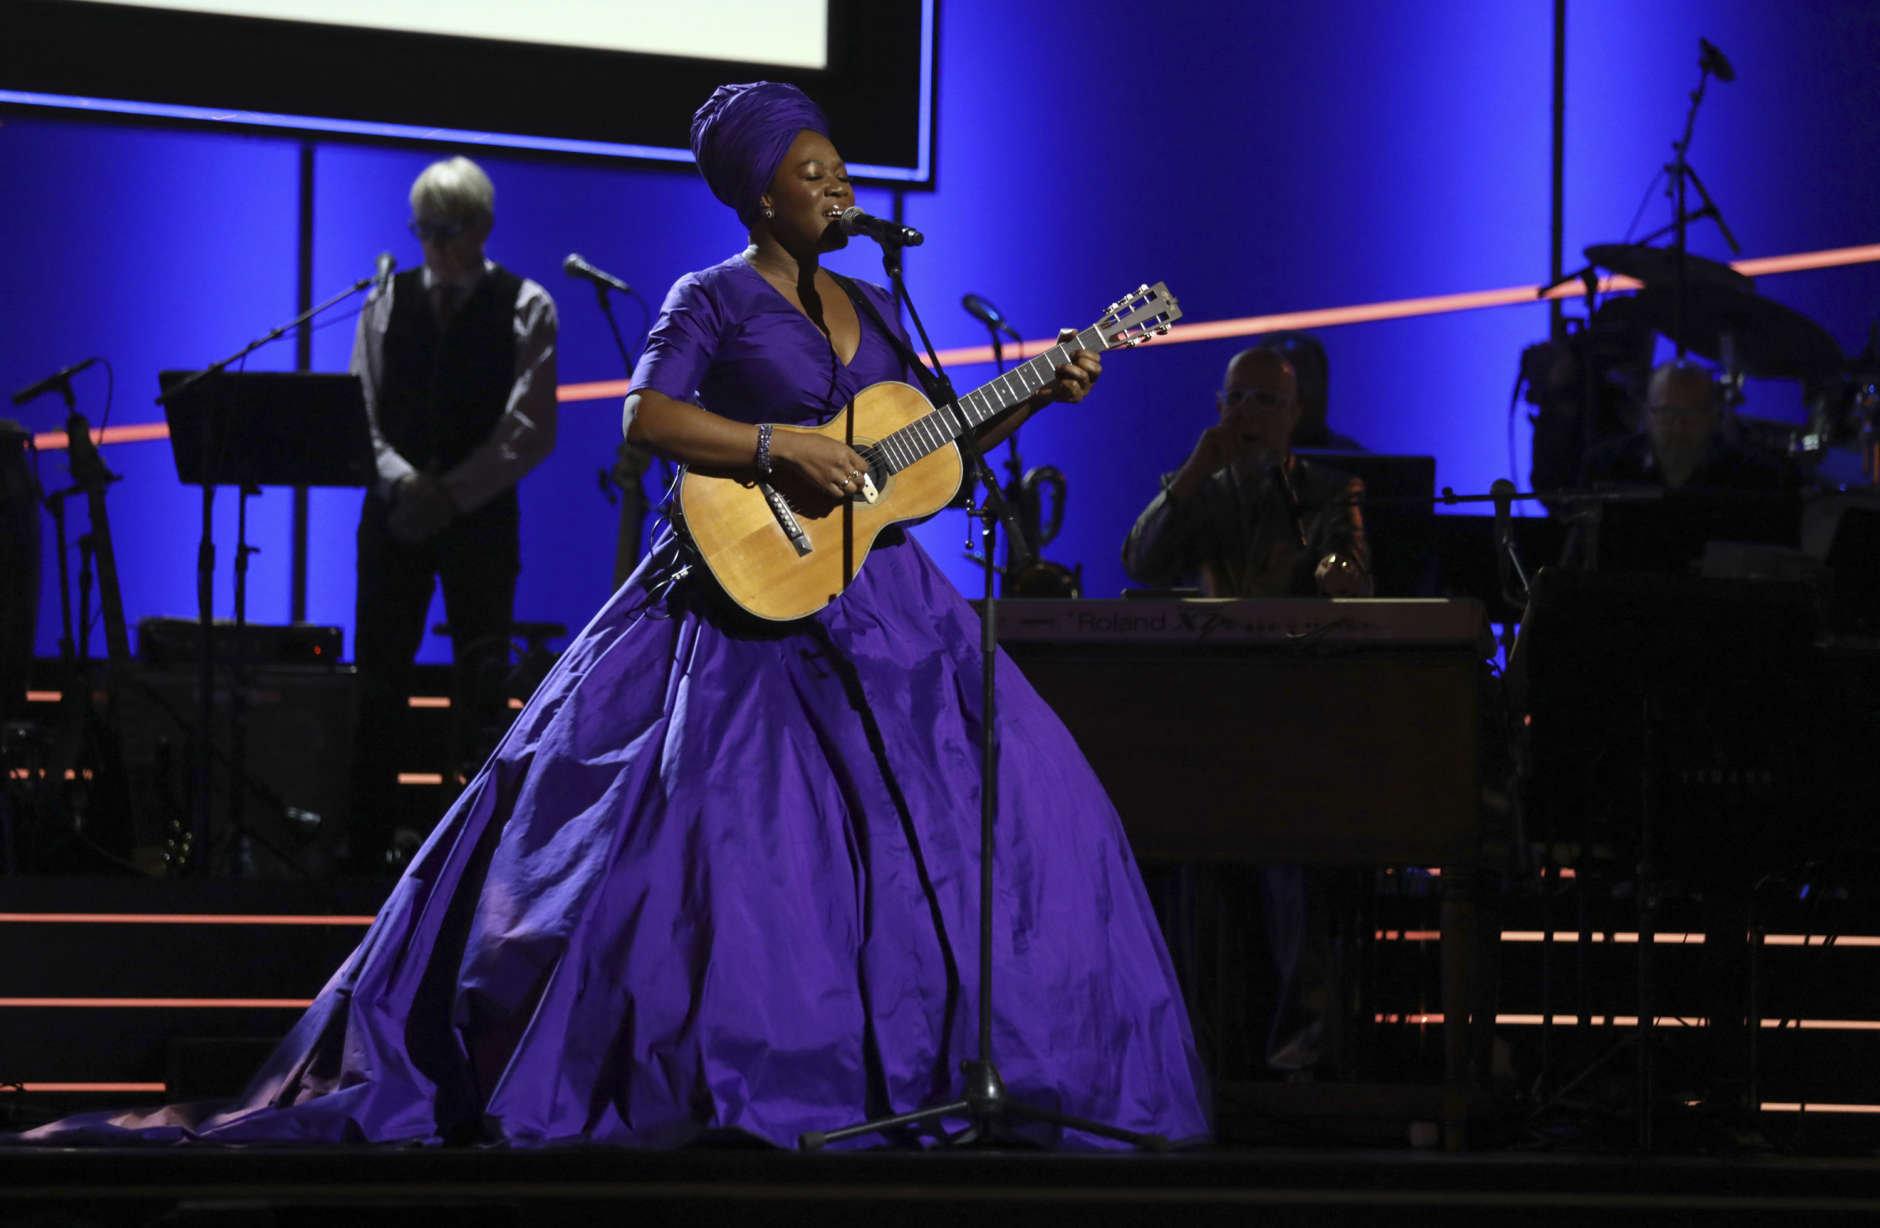 India.Arie performs "I Am Light" at the 60th annual Grammy Awards at Madison Square Garden on Sunday, Jan. 28, 2018, in New York. (Photo by Matt Sayles/Invision/AP)